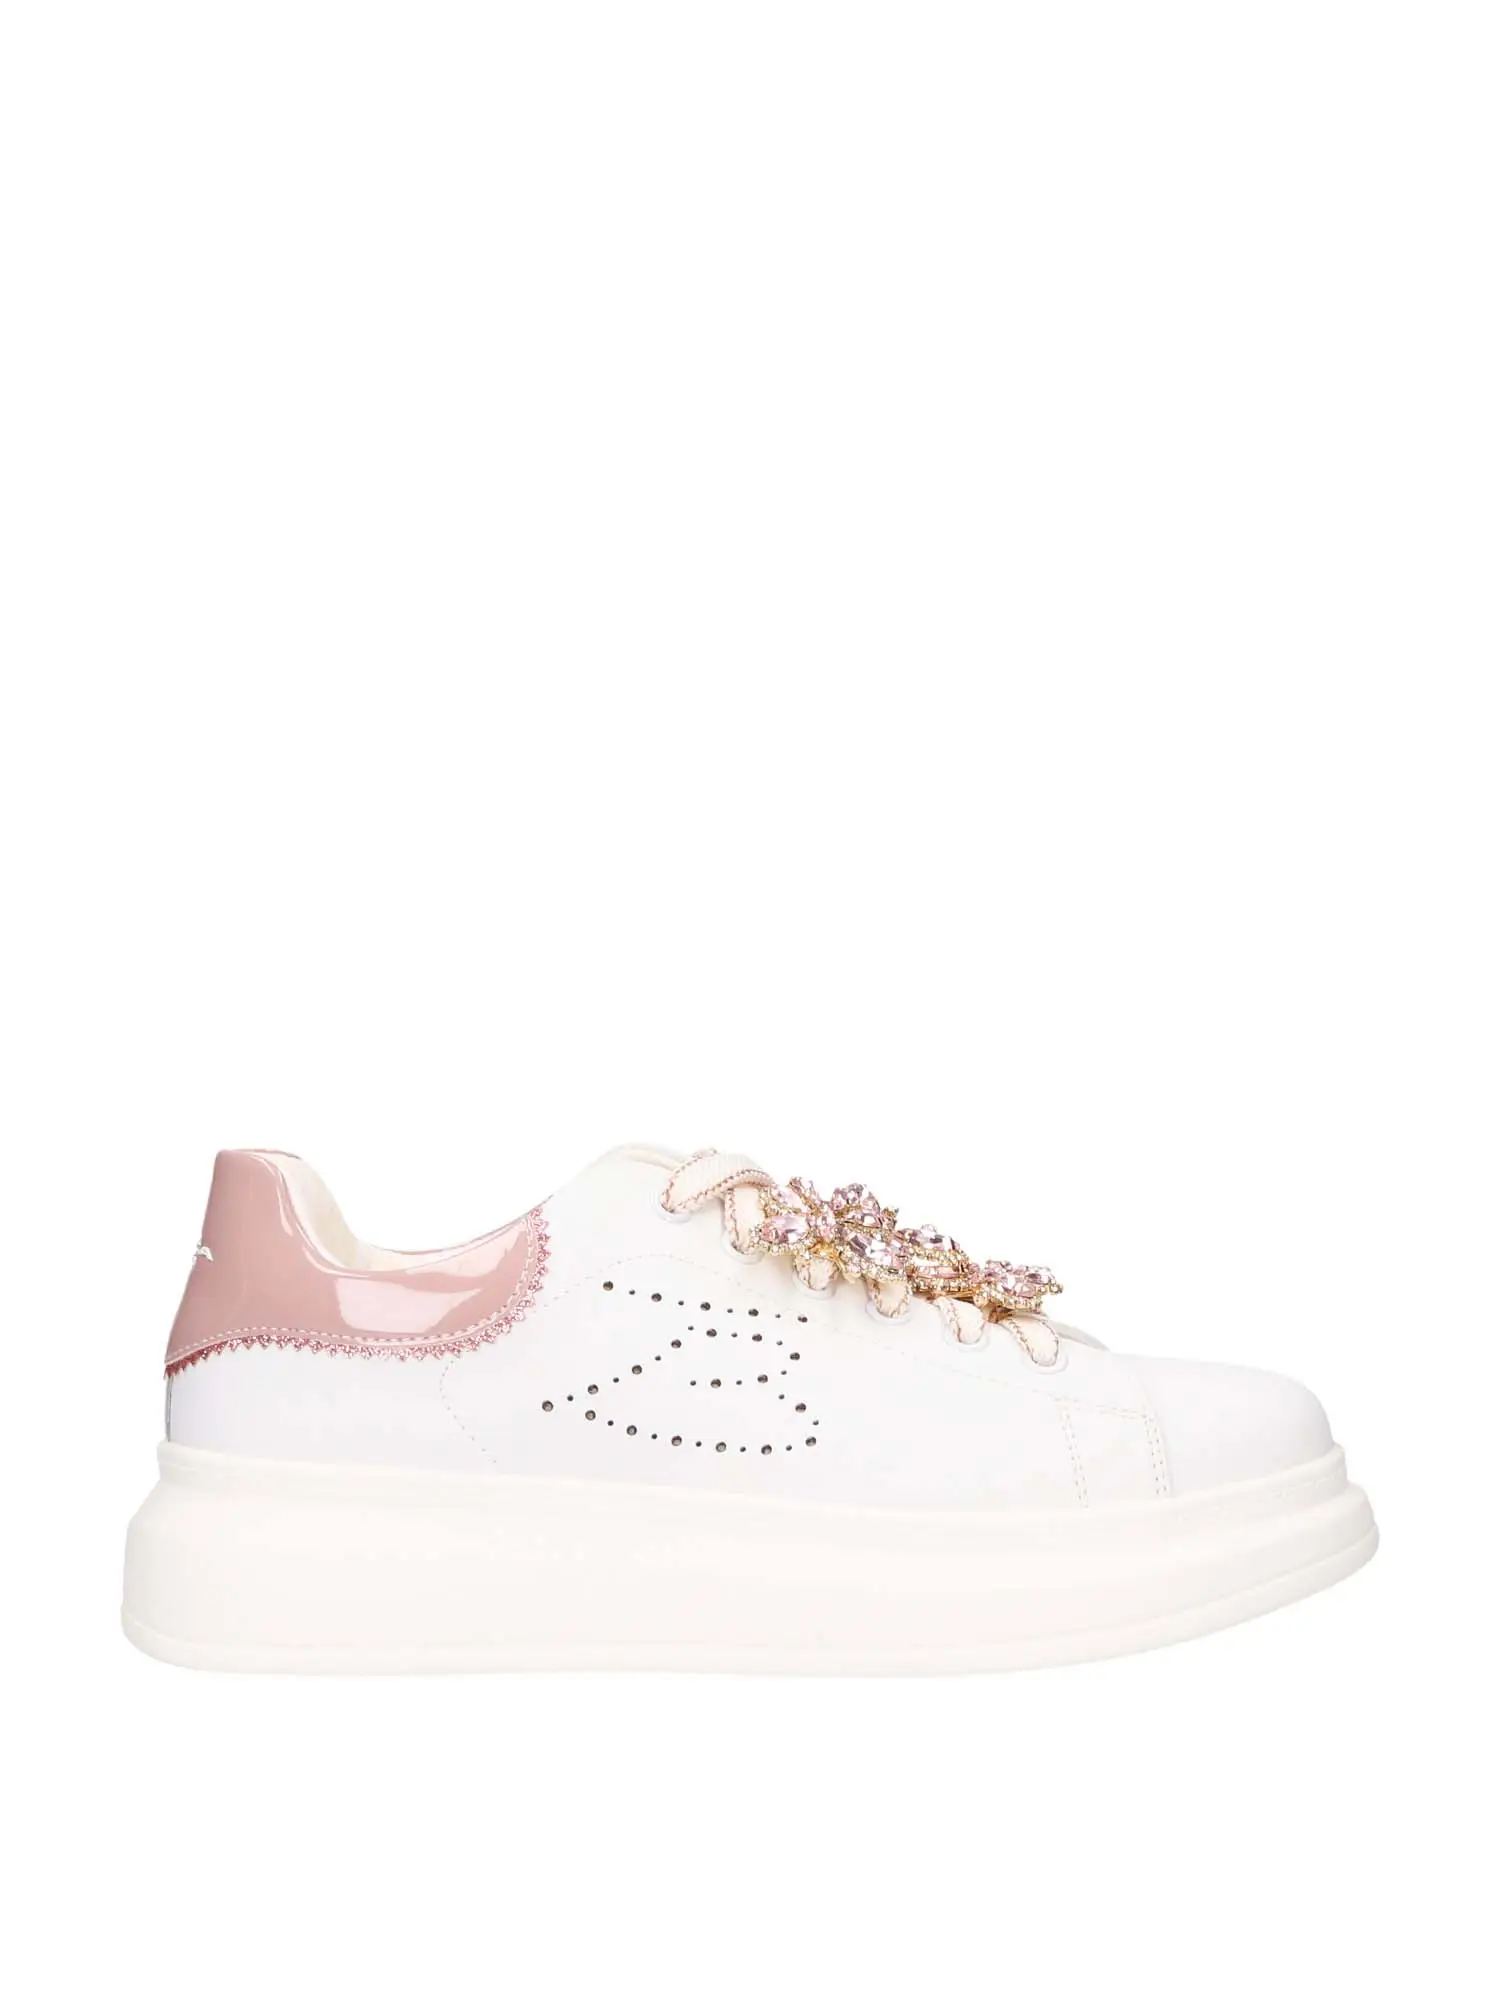 SNEAKERS DONNA - TOSCA BLU - SS2402S016 - BIANCO/ROSA, 39